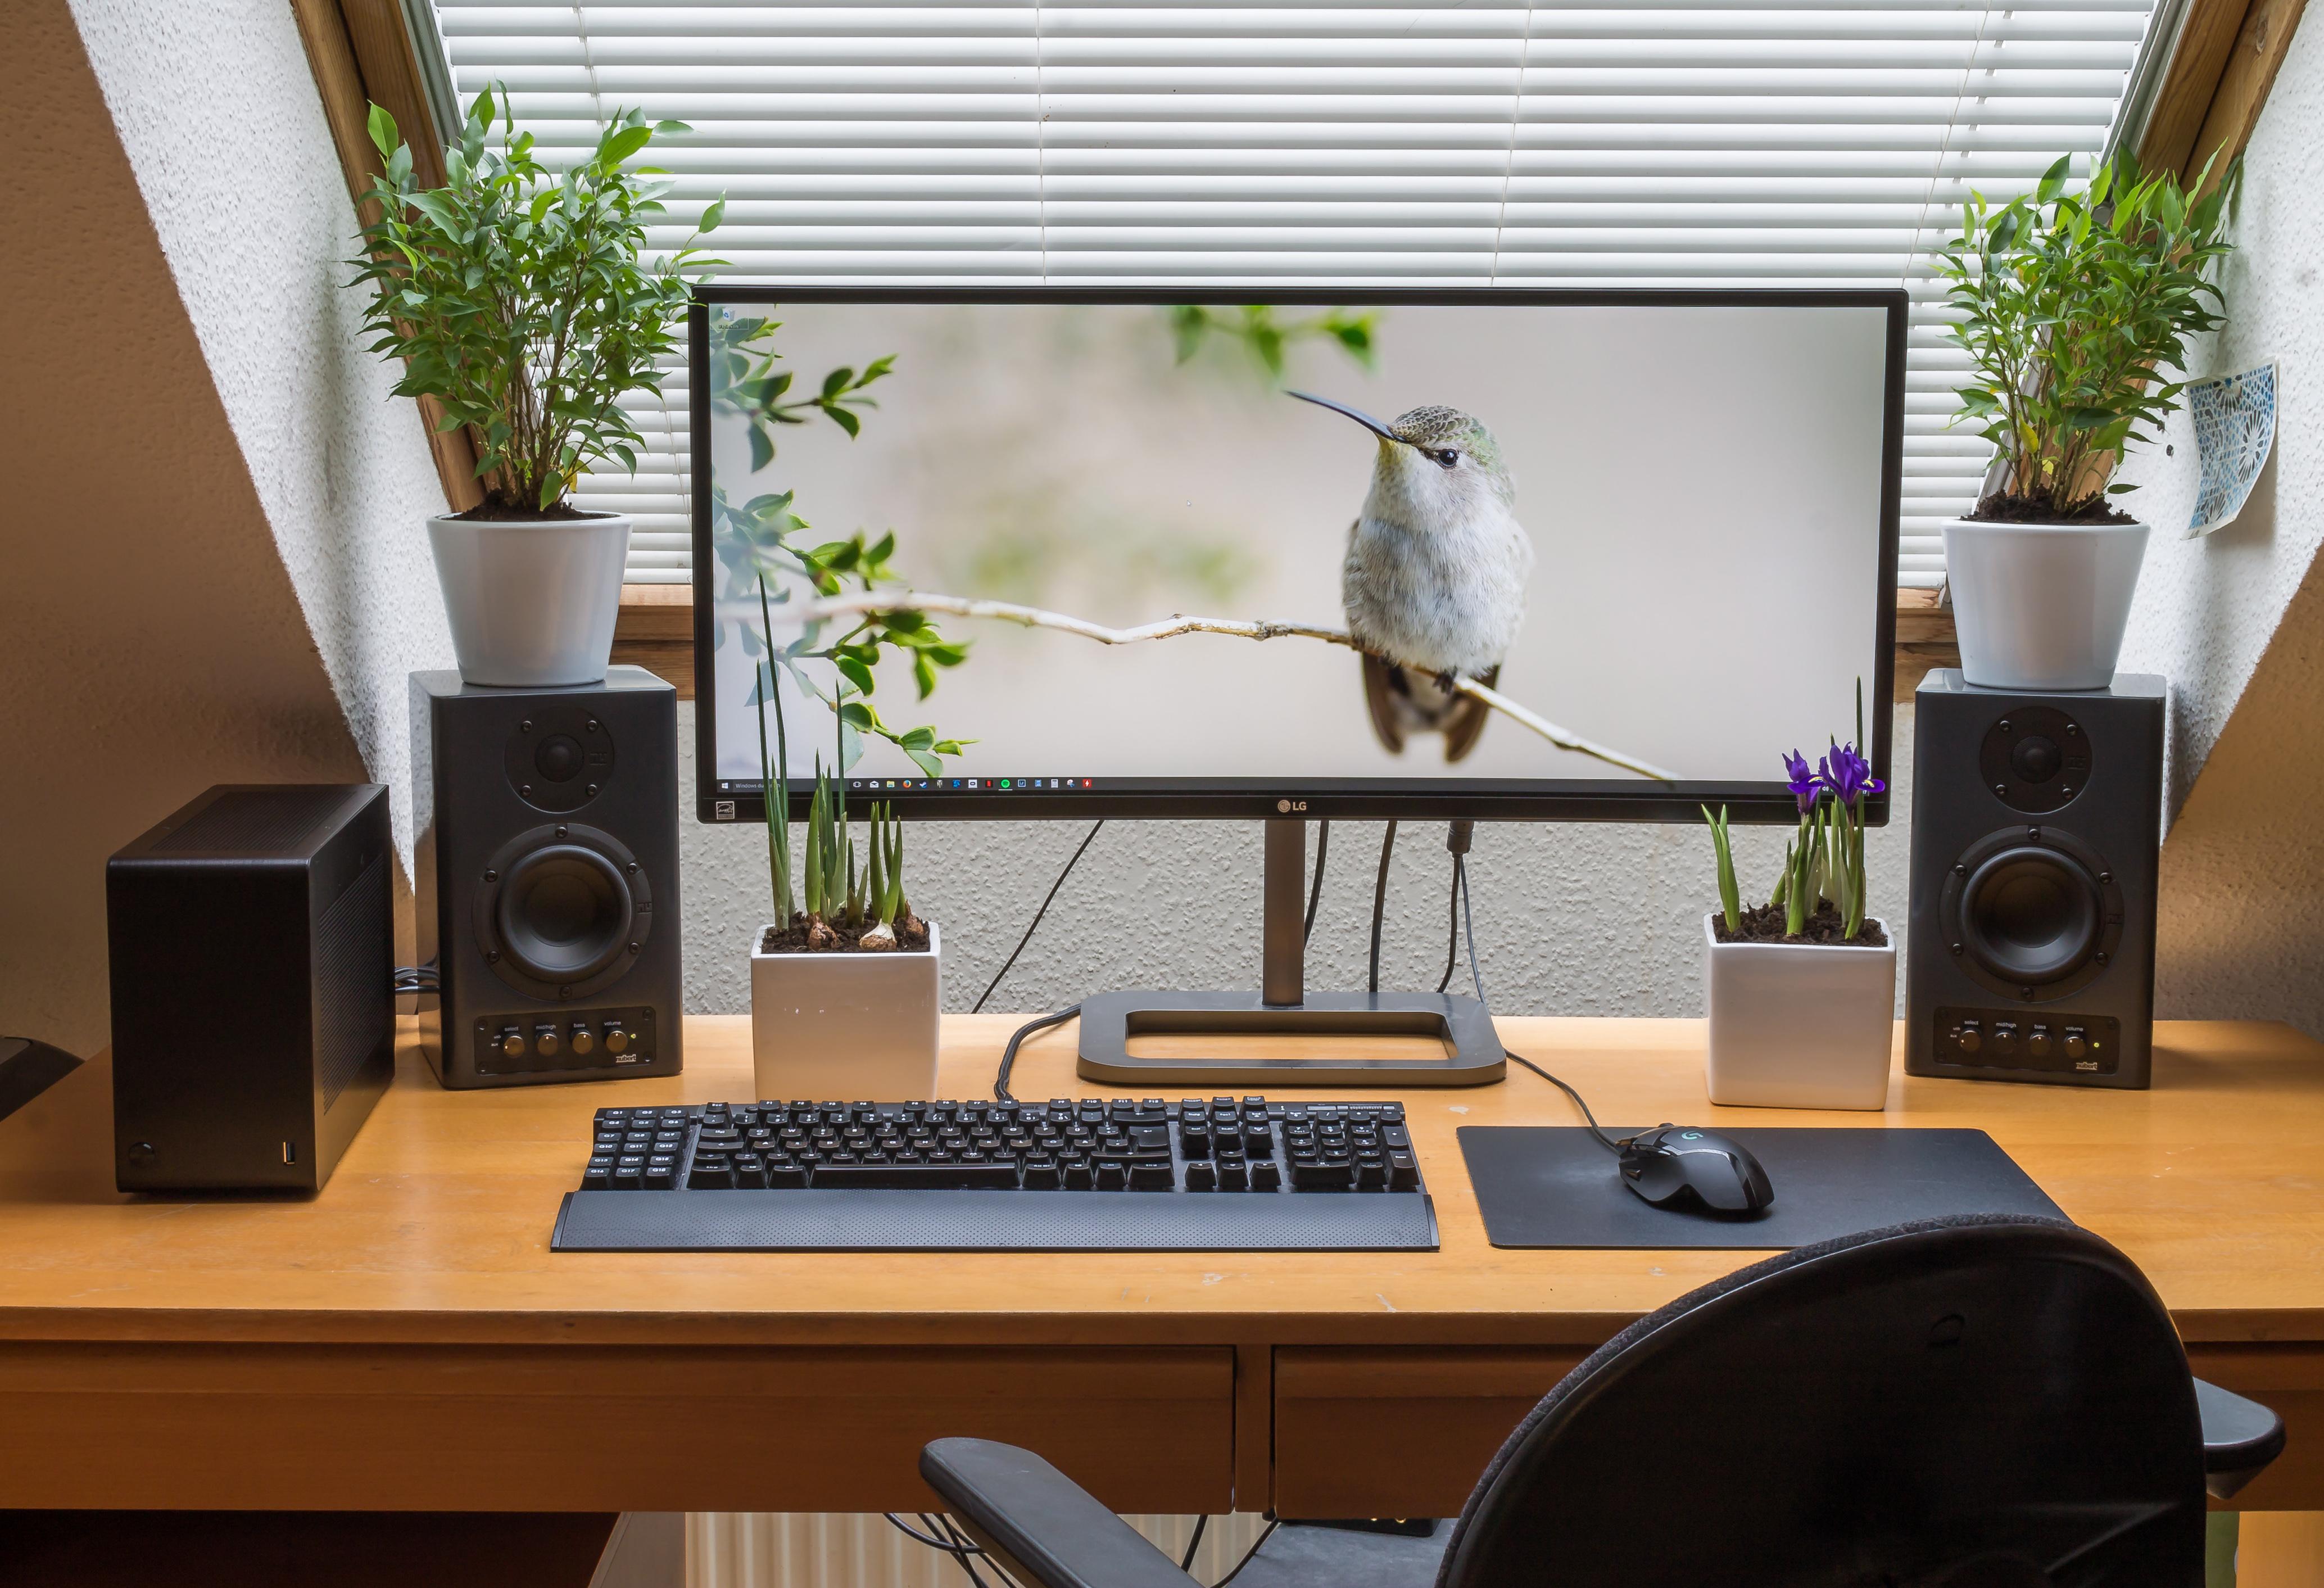 Workspace Computer Monitor Desk Speakers Keyboards Computer Mouse Plant Pot Plants Blinds 4135x2825